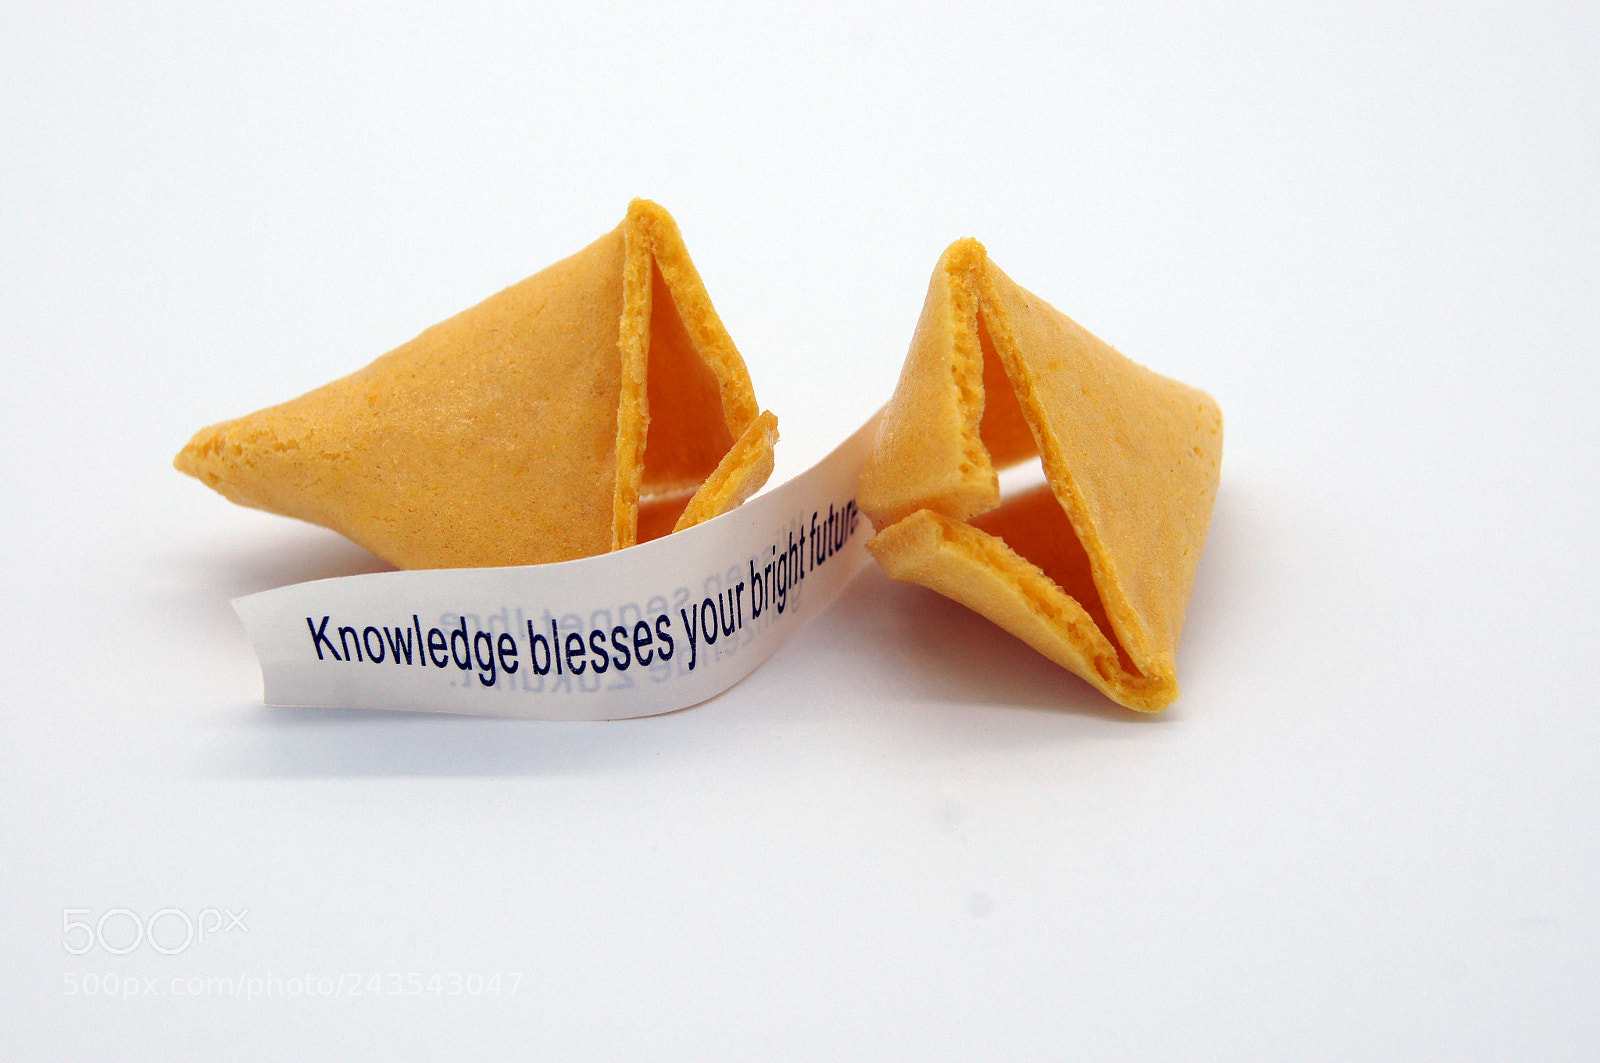 Sony SLT-A55 (SLT-A55V) sample photo. Fortune cookie on white photography